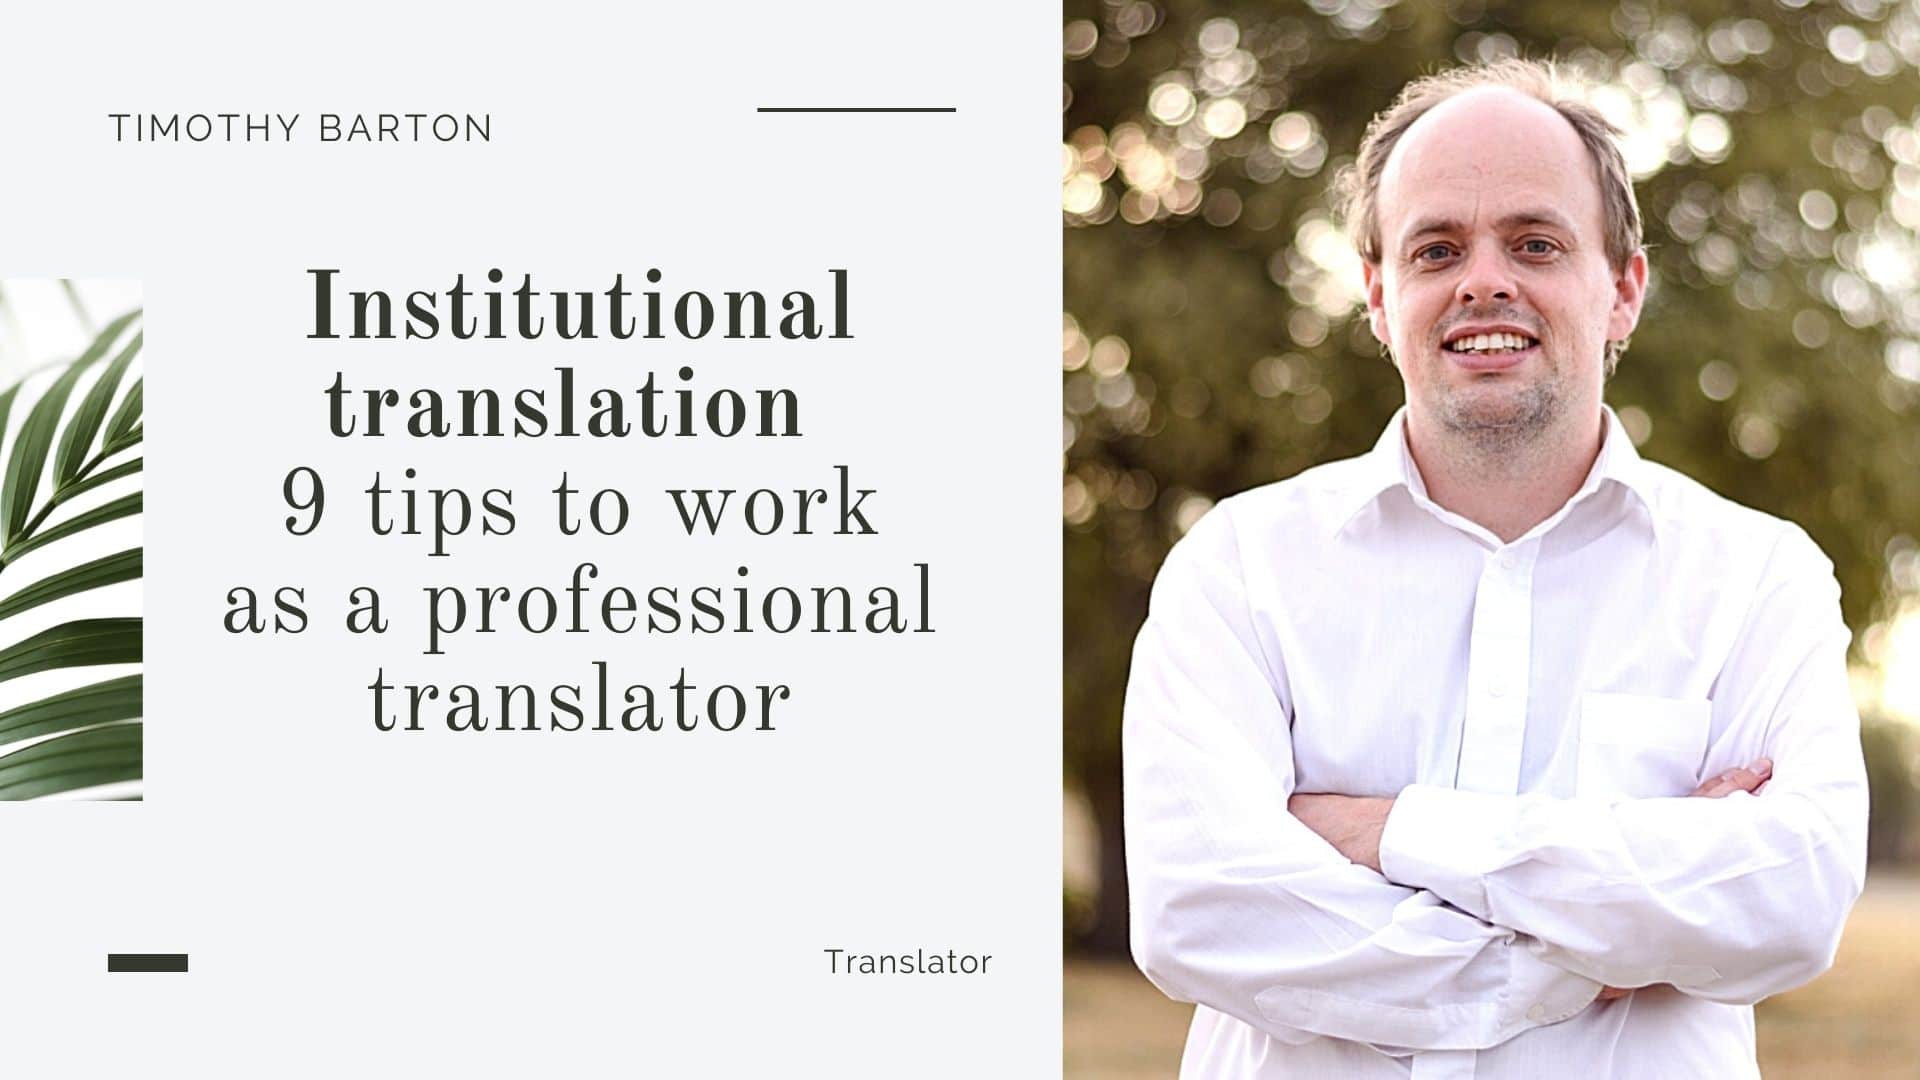 Institutional translation – 9 tips to work as a professional translator